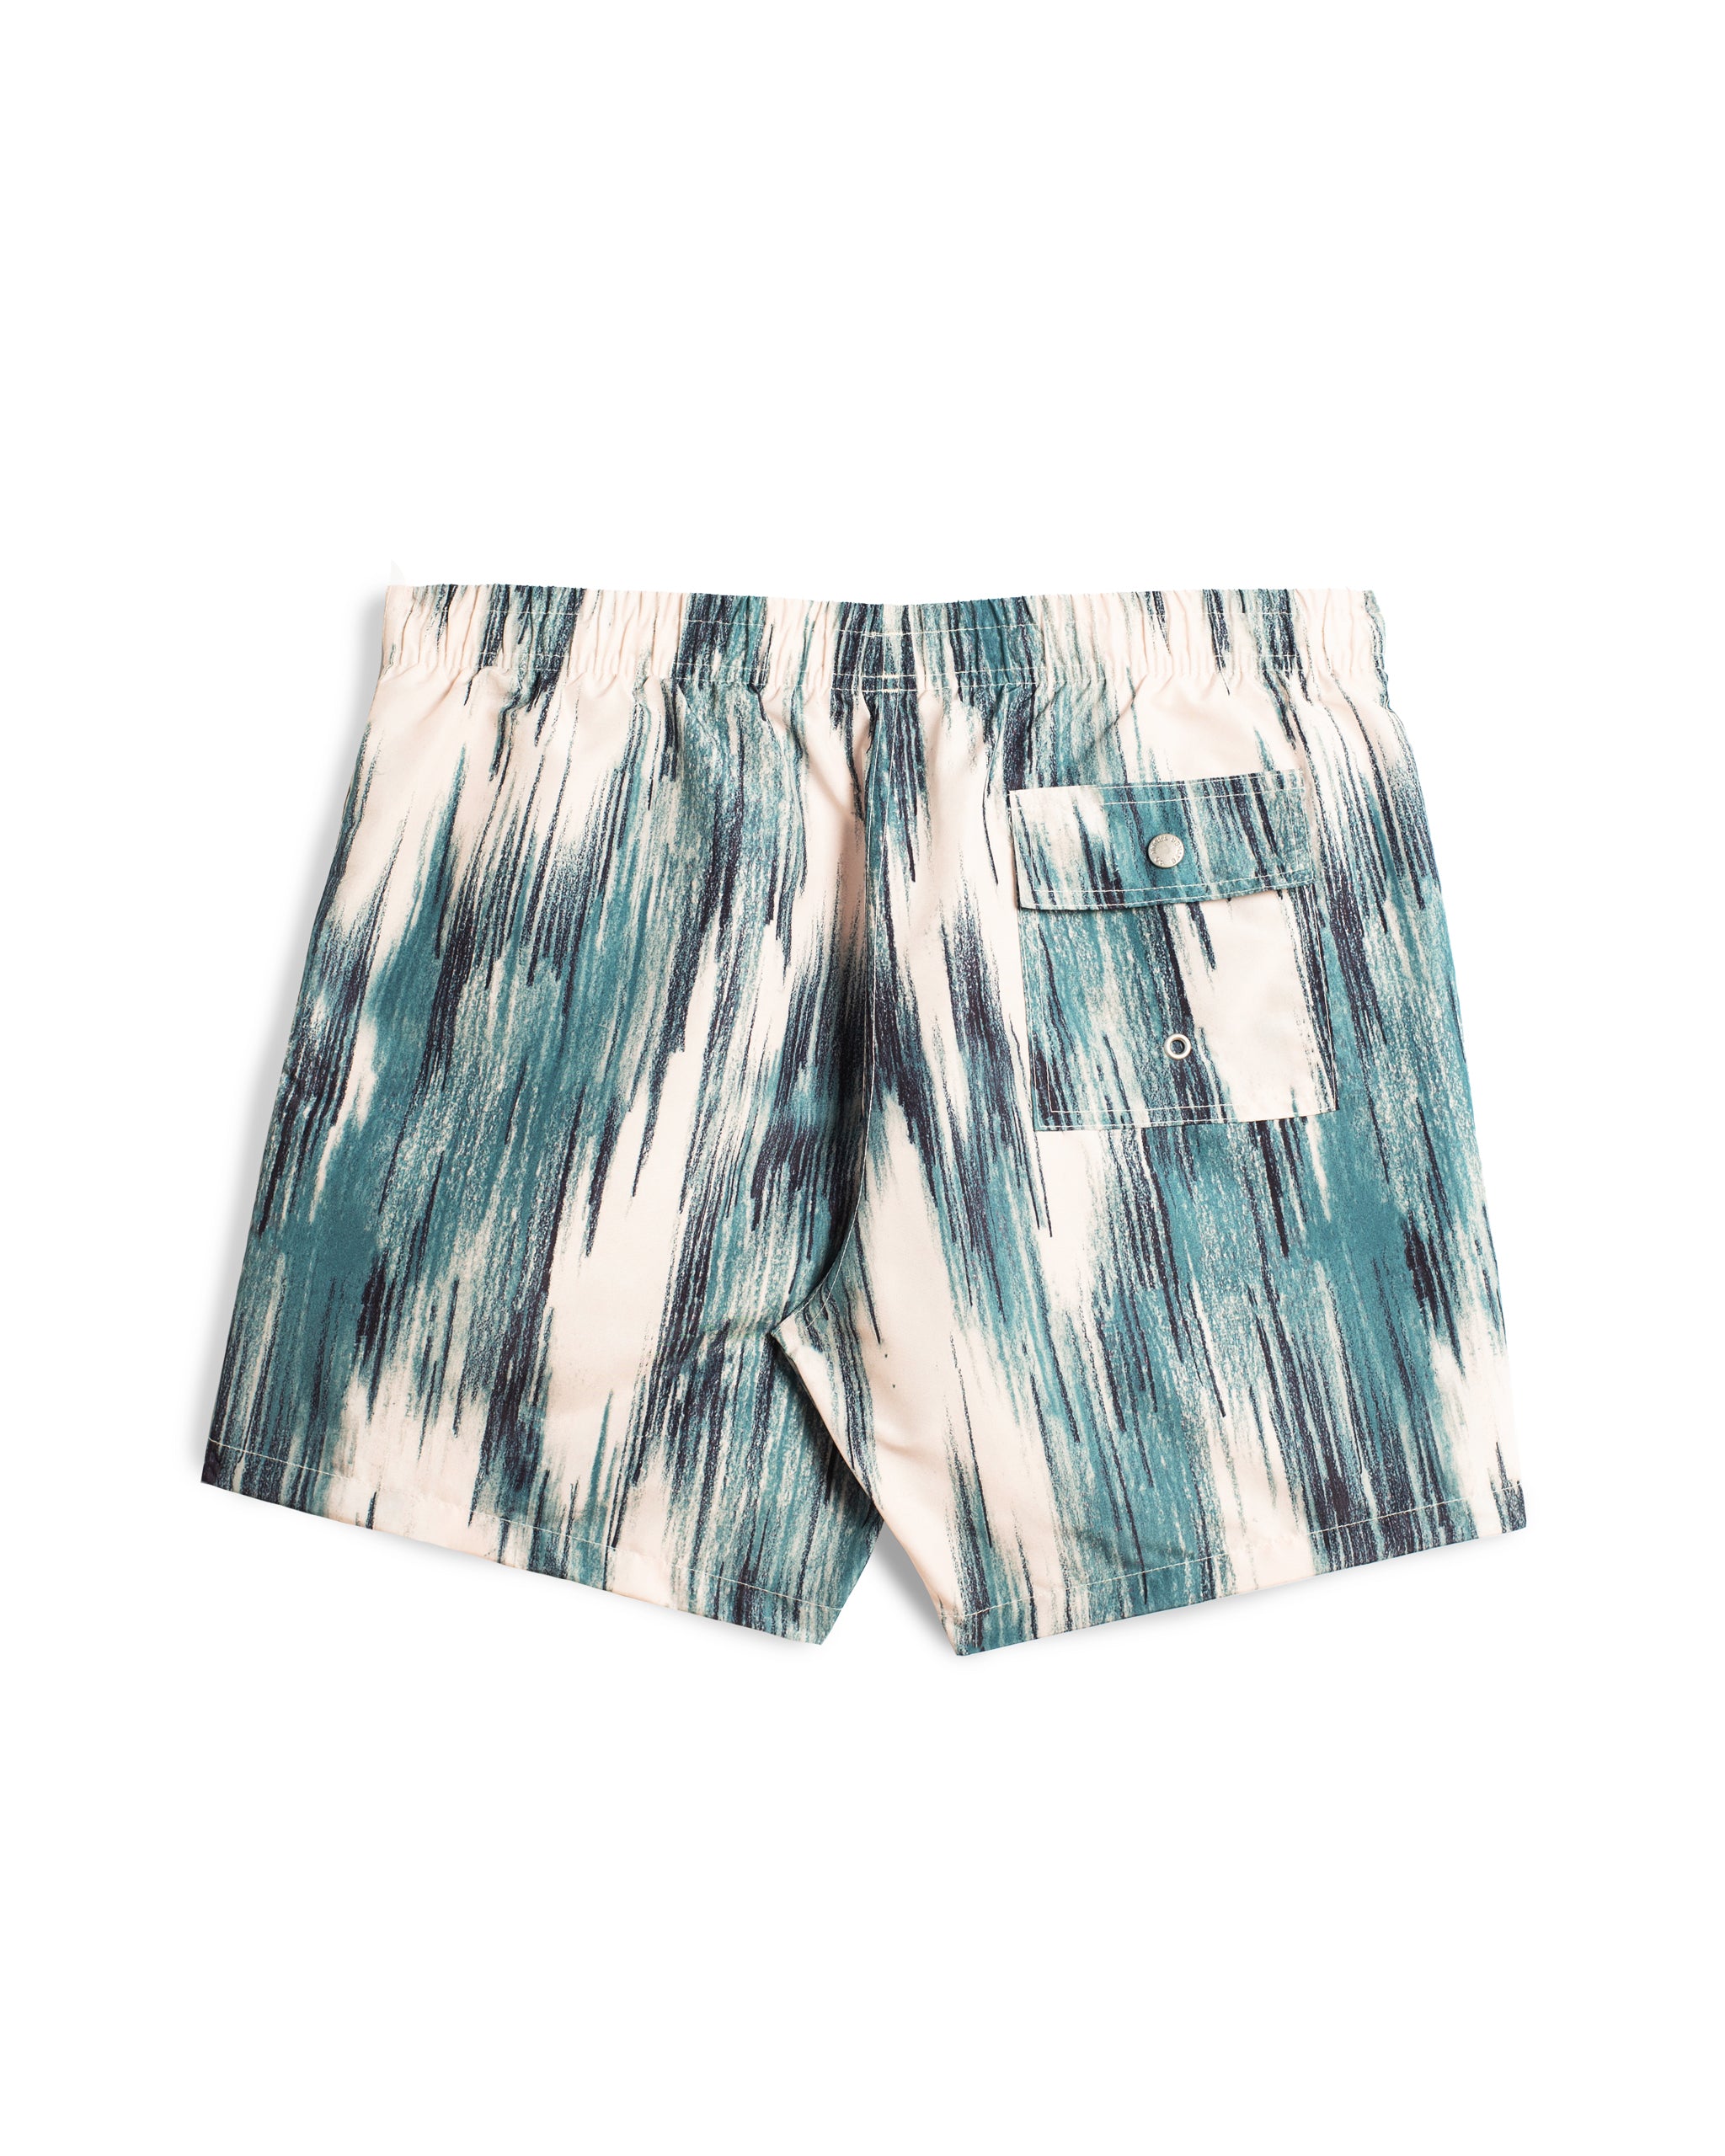 teal and cream Bather swim trunk with color contrasting pattern back shot